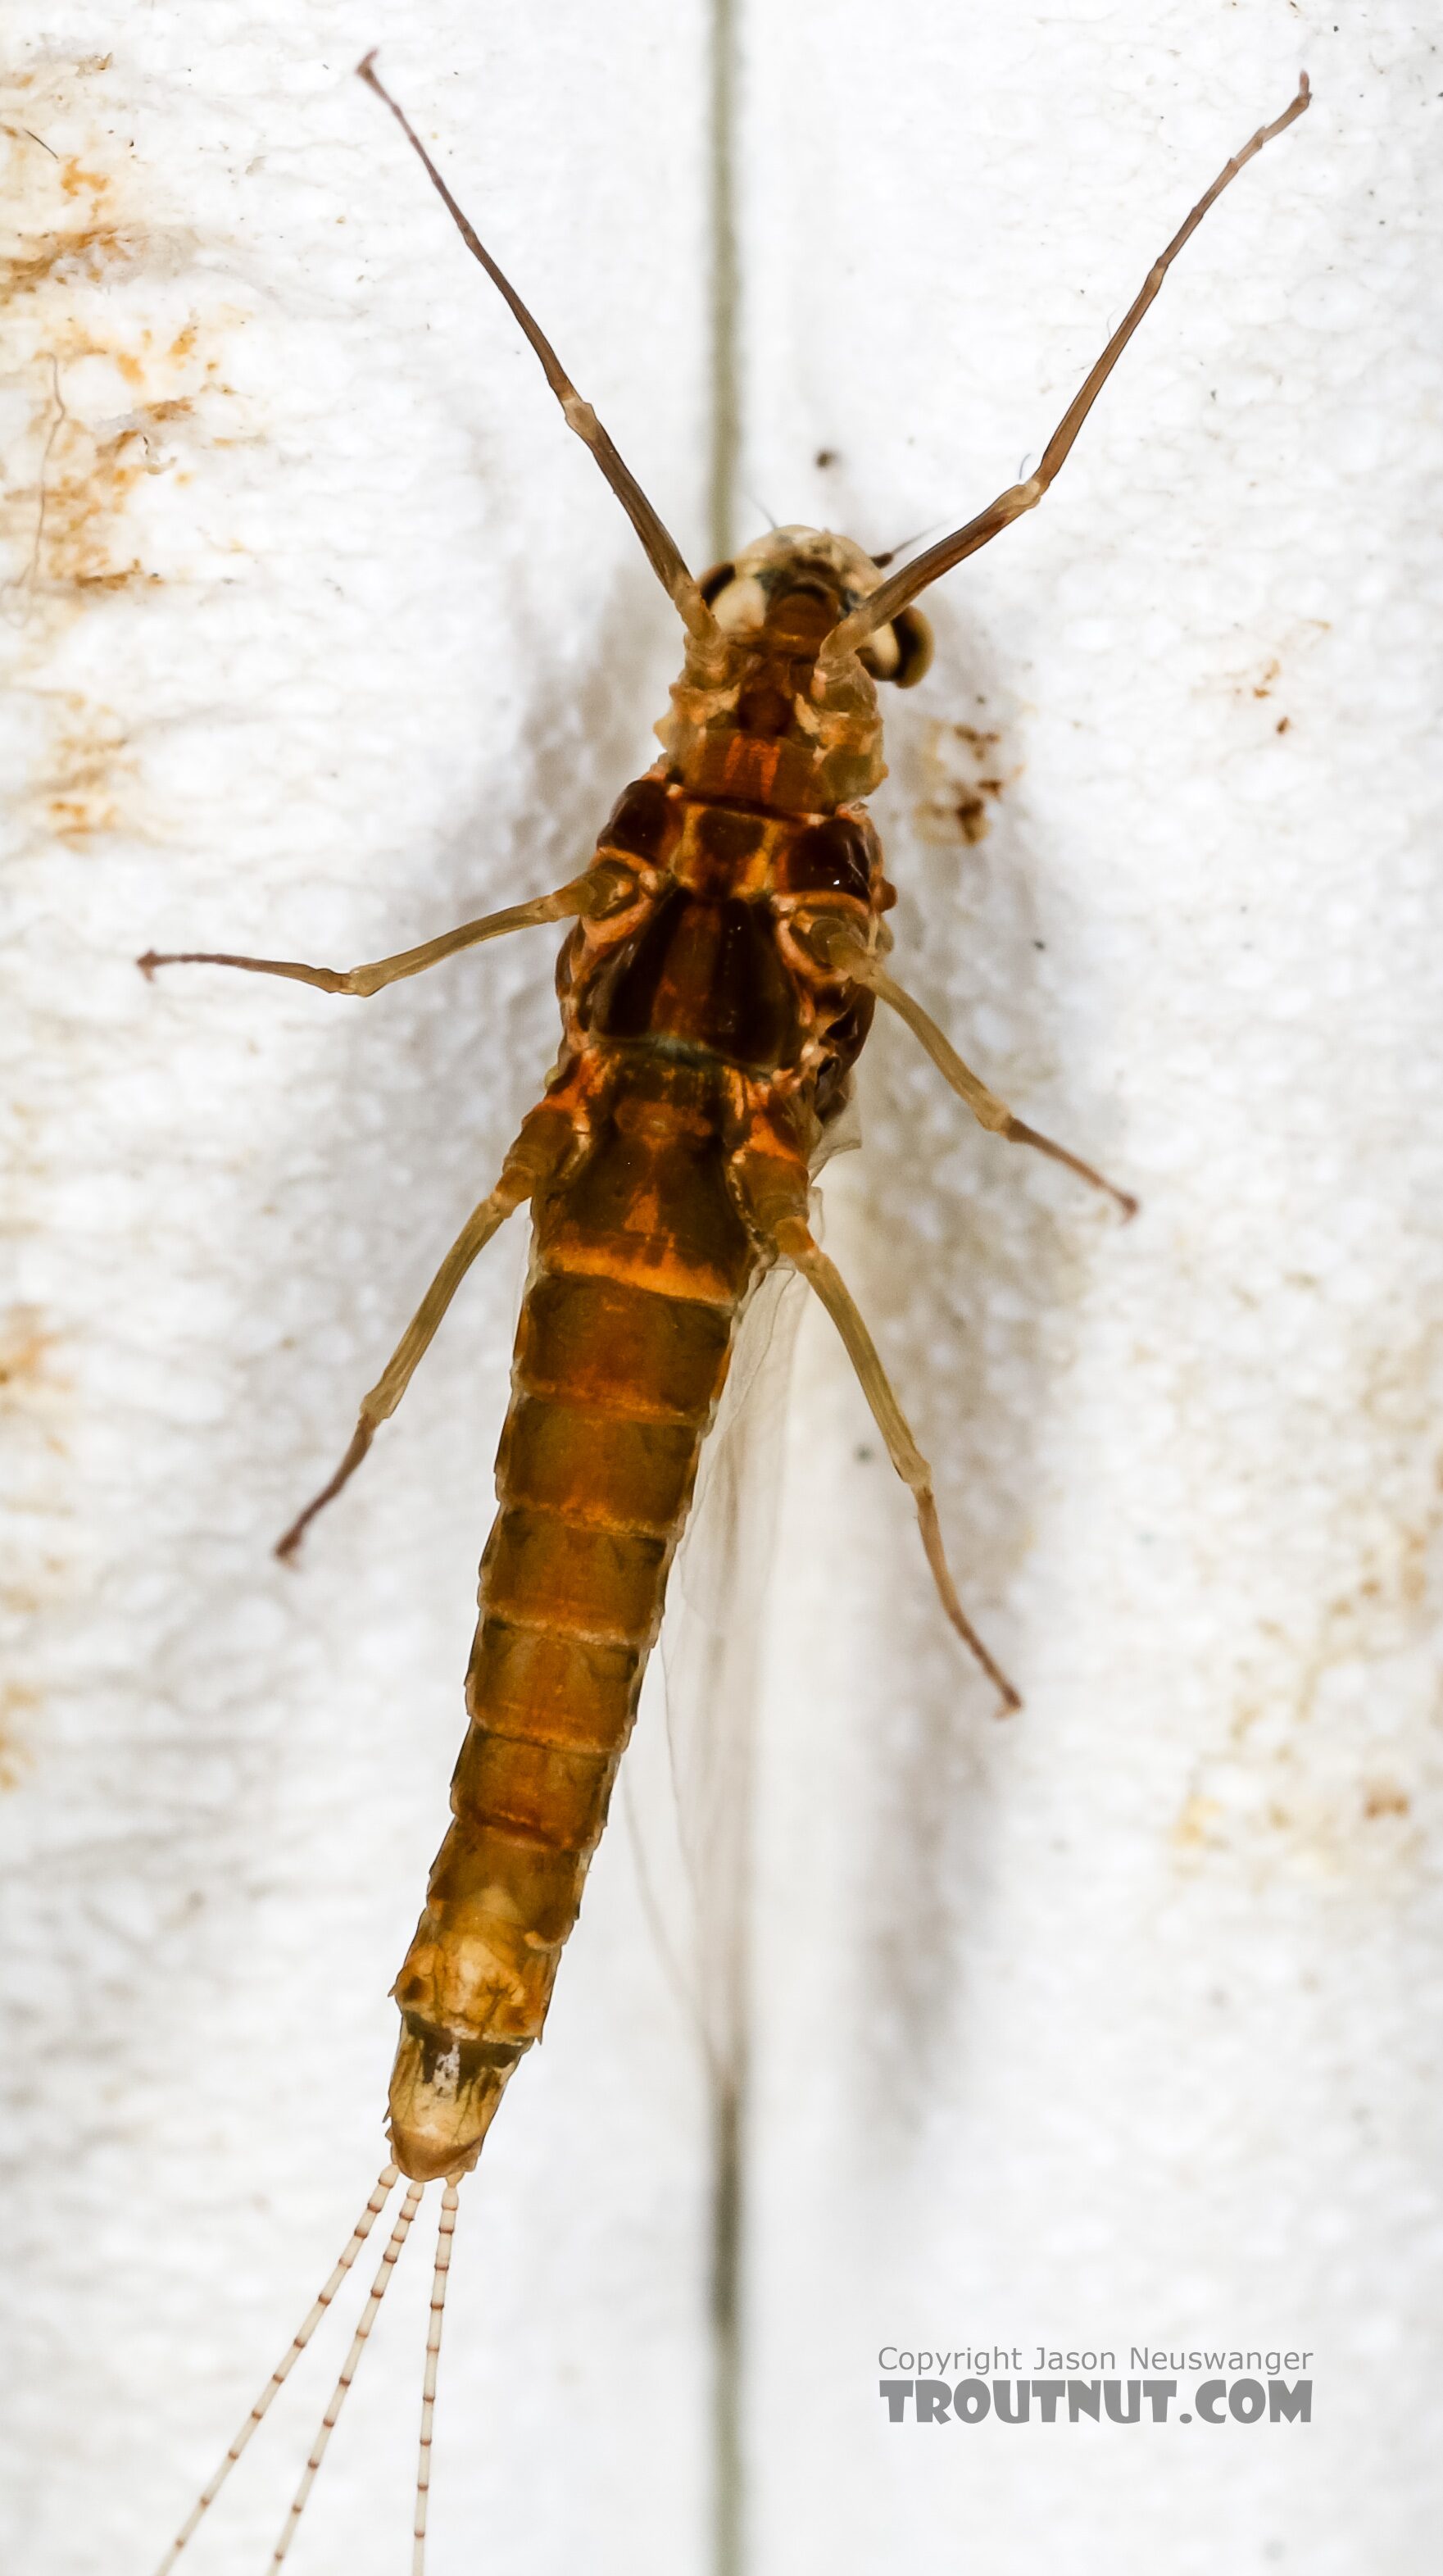 Female Ephemerella excrucians (Pale Morning Dun) Mayfly Spinner from the Henry's Fork of the Snake River in Idaho